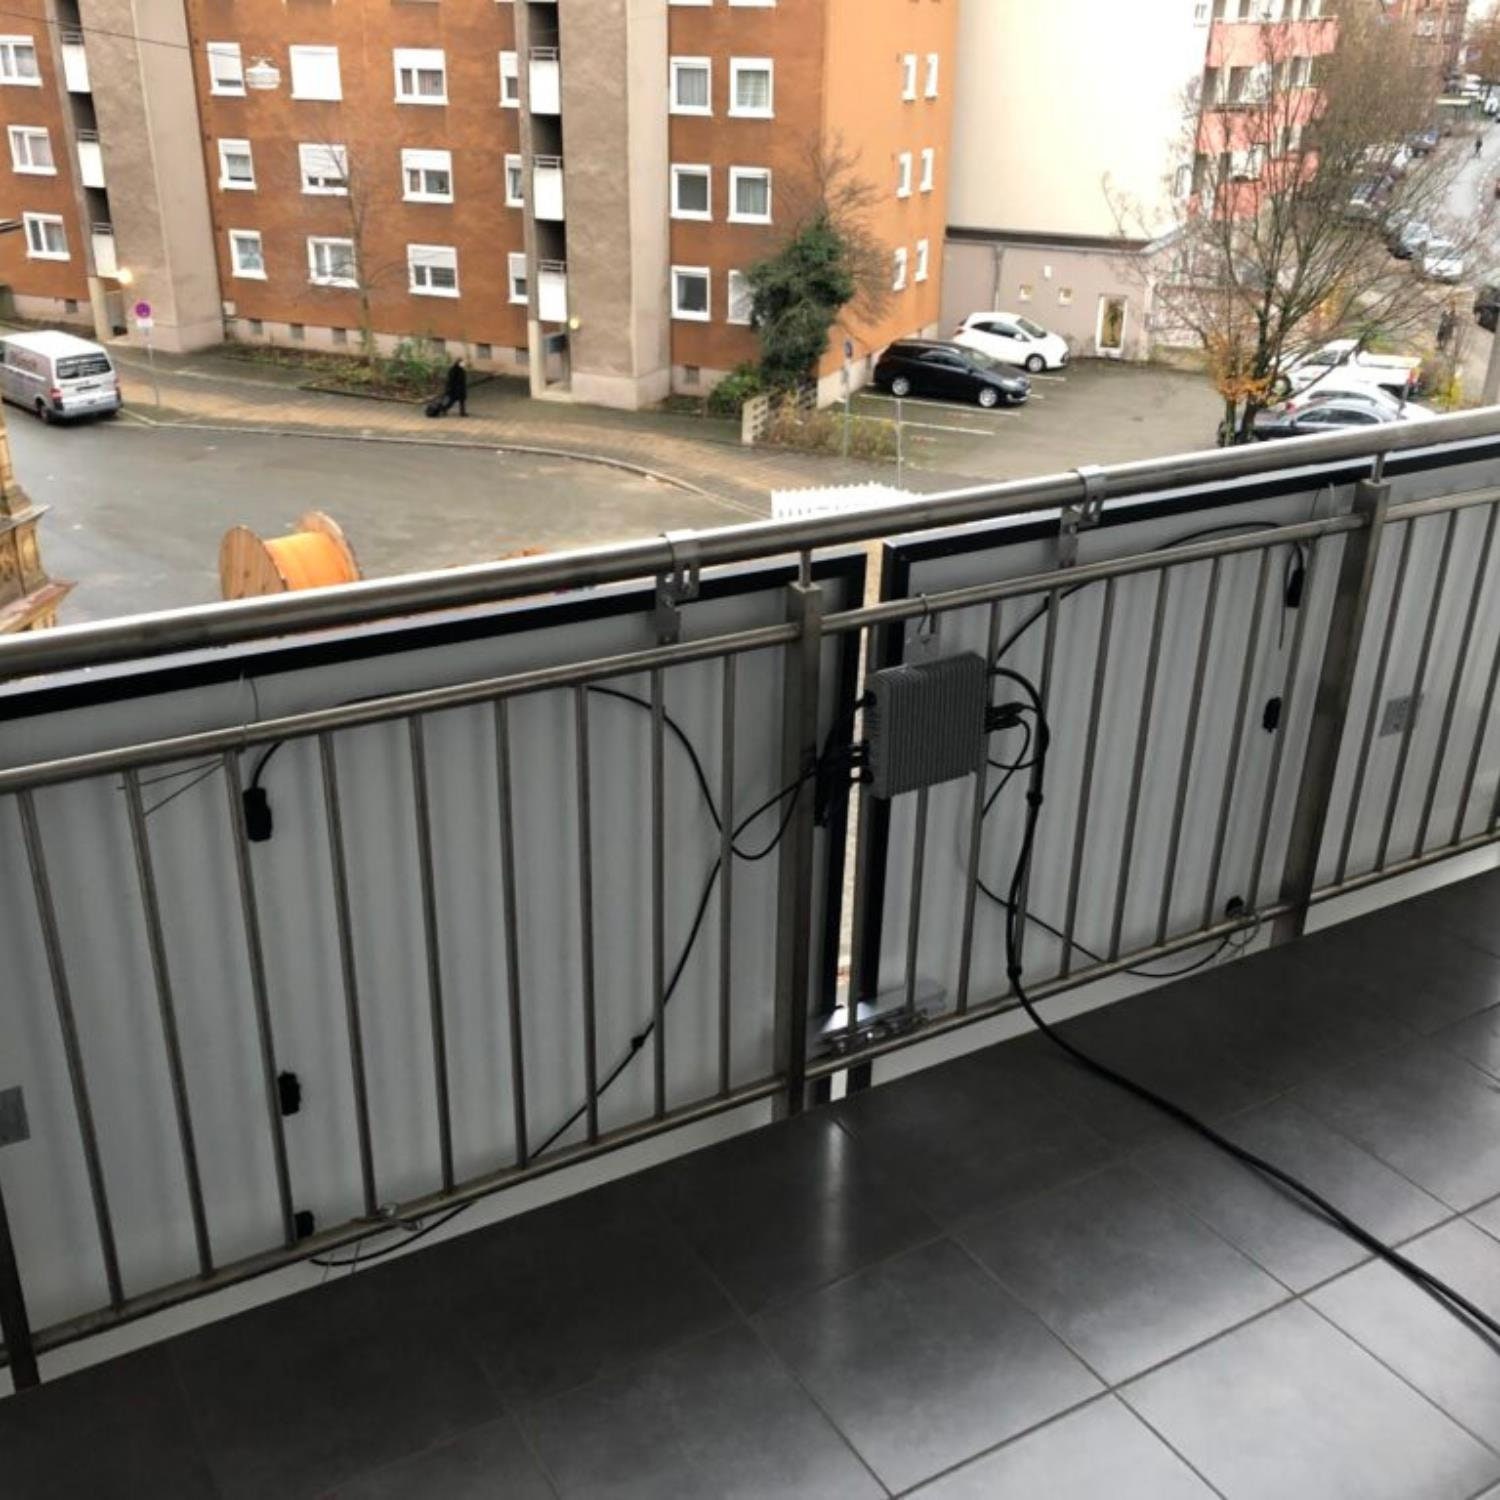 Solar Hook Balcony Suitable for Solar Panel Balcony Power picture pic image